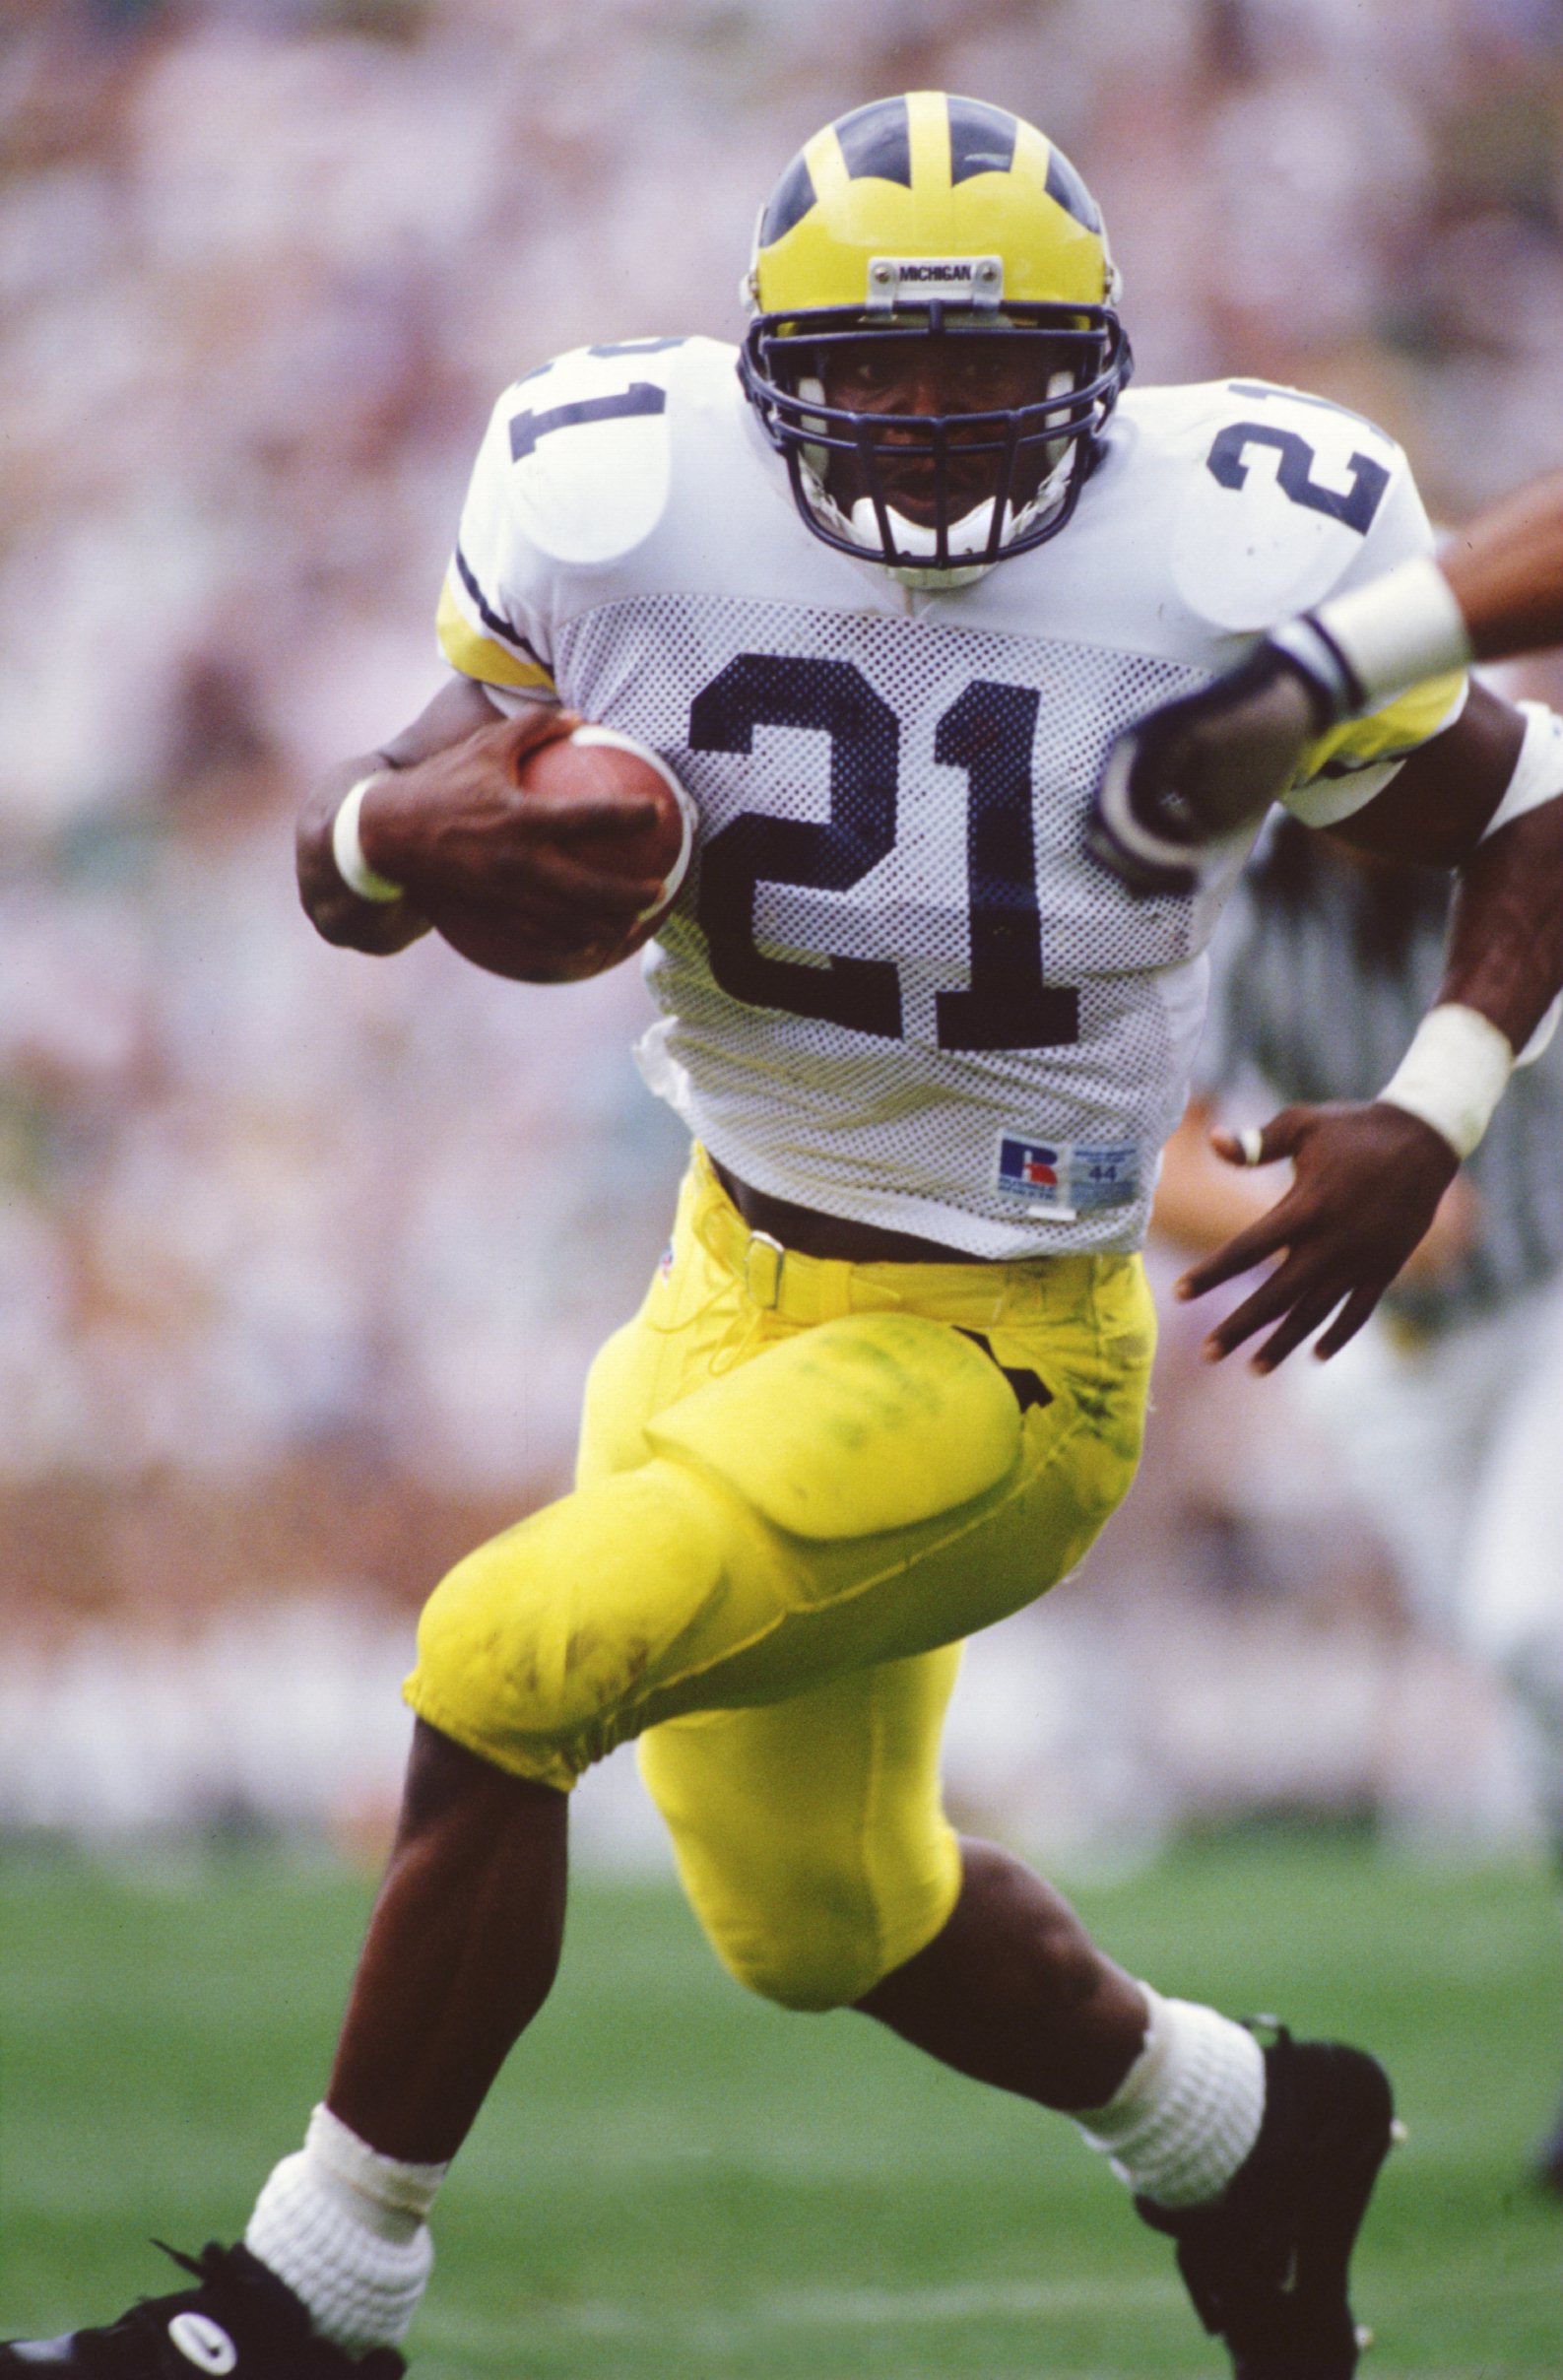 10 Sep 1994: MICHIGAN RUNNING BACK TIM BIAKABUTUKA IN ACTION DURING A 26-24 WIN OVER NOTRE DAME IN SOUTH BEND, INDIANA.